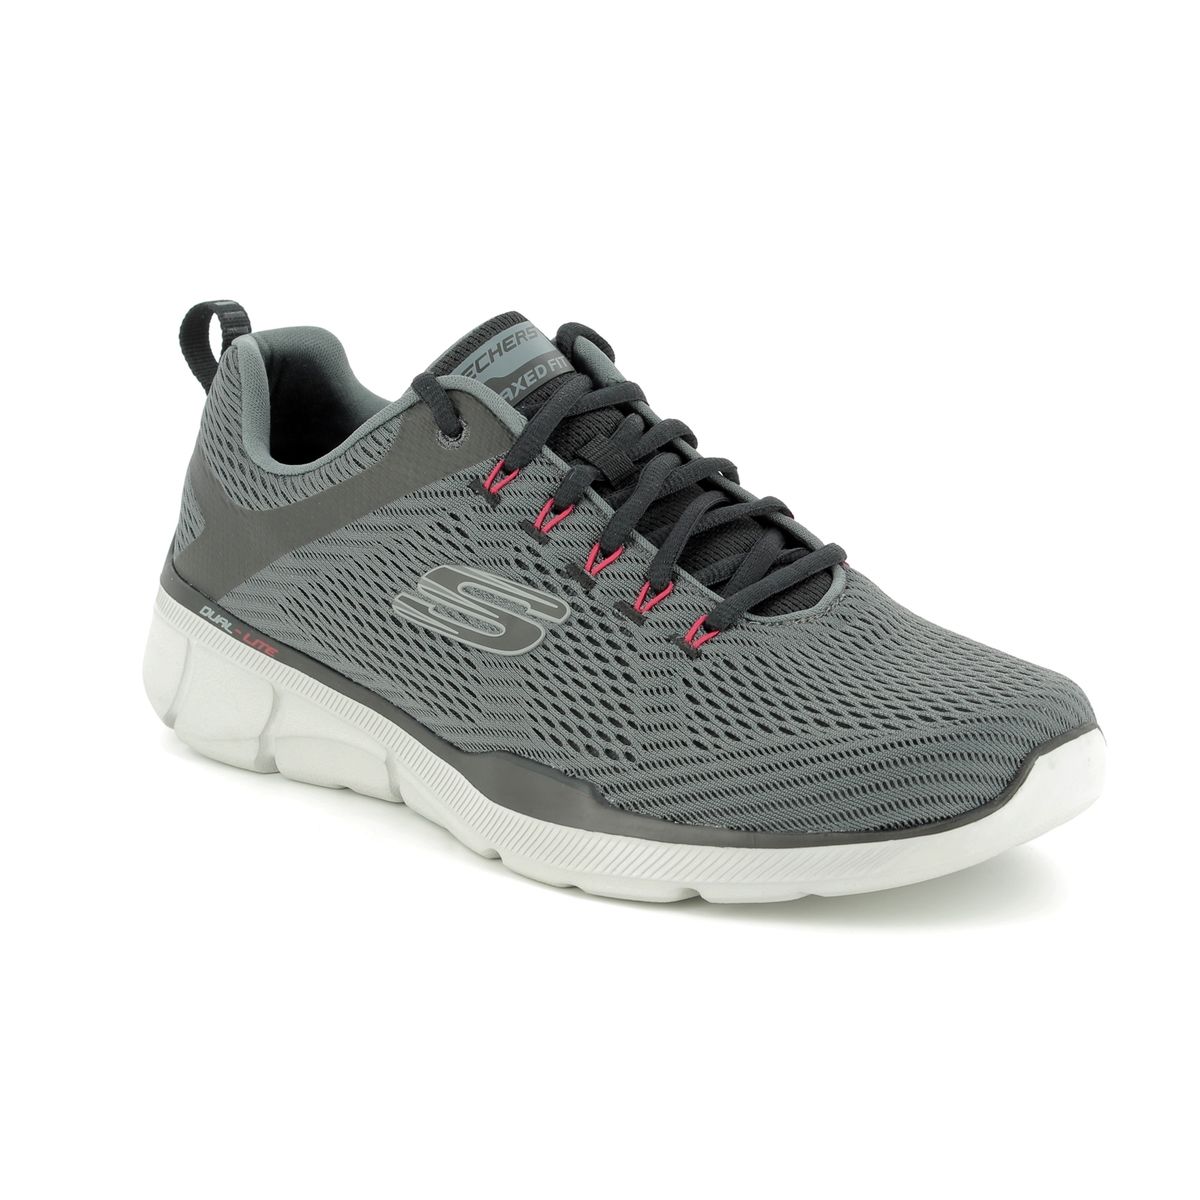 skechers men's equalizer 3.0 trainers